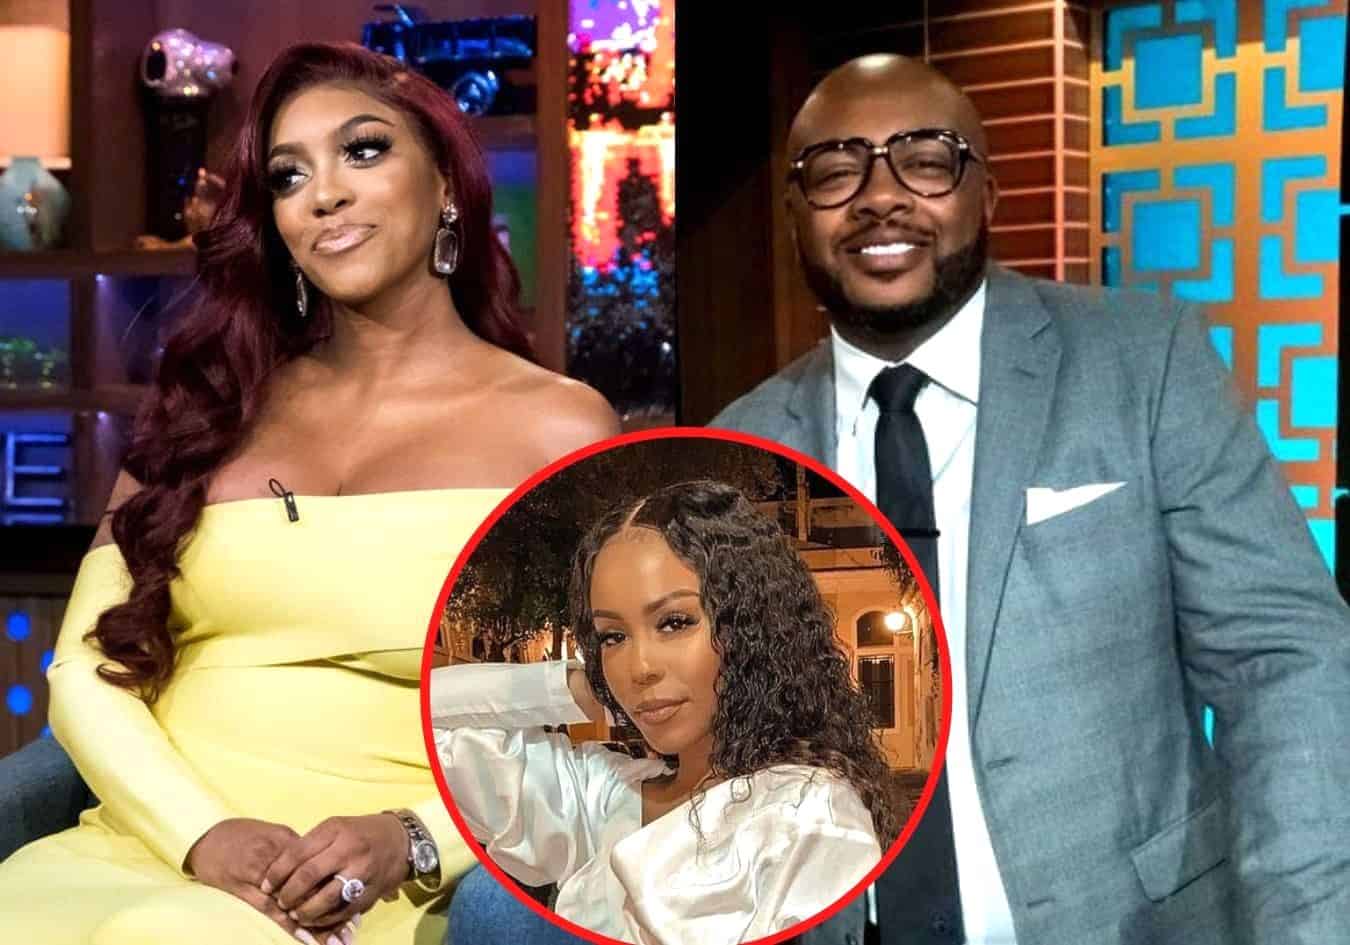 Porsha Williams' Cousin Accuses Dennis McKinley of "Sexual Harassment" and Physical Abuse, See Storm's Photos of Injuries